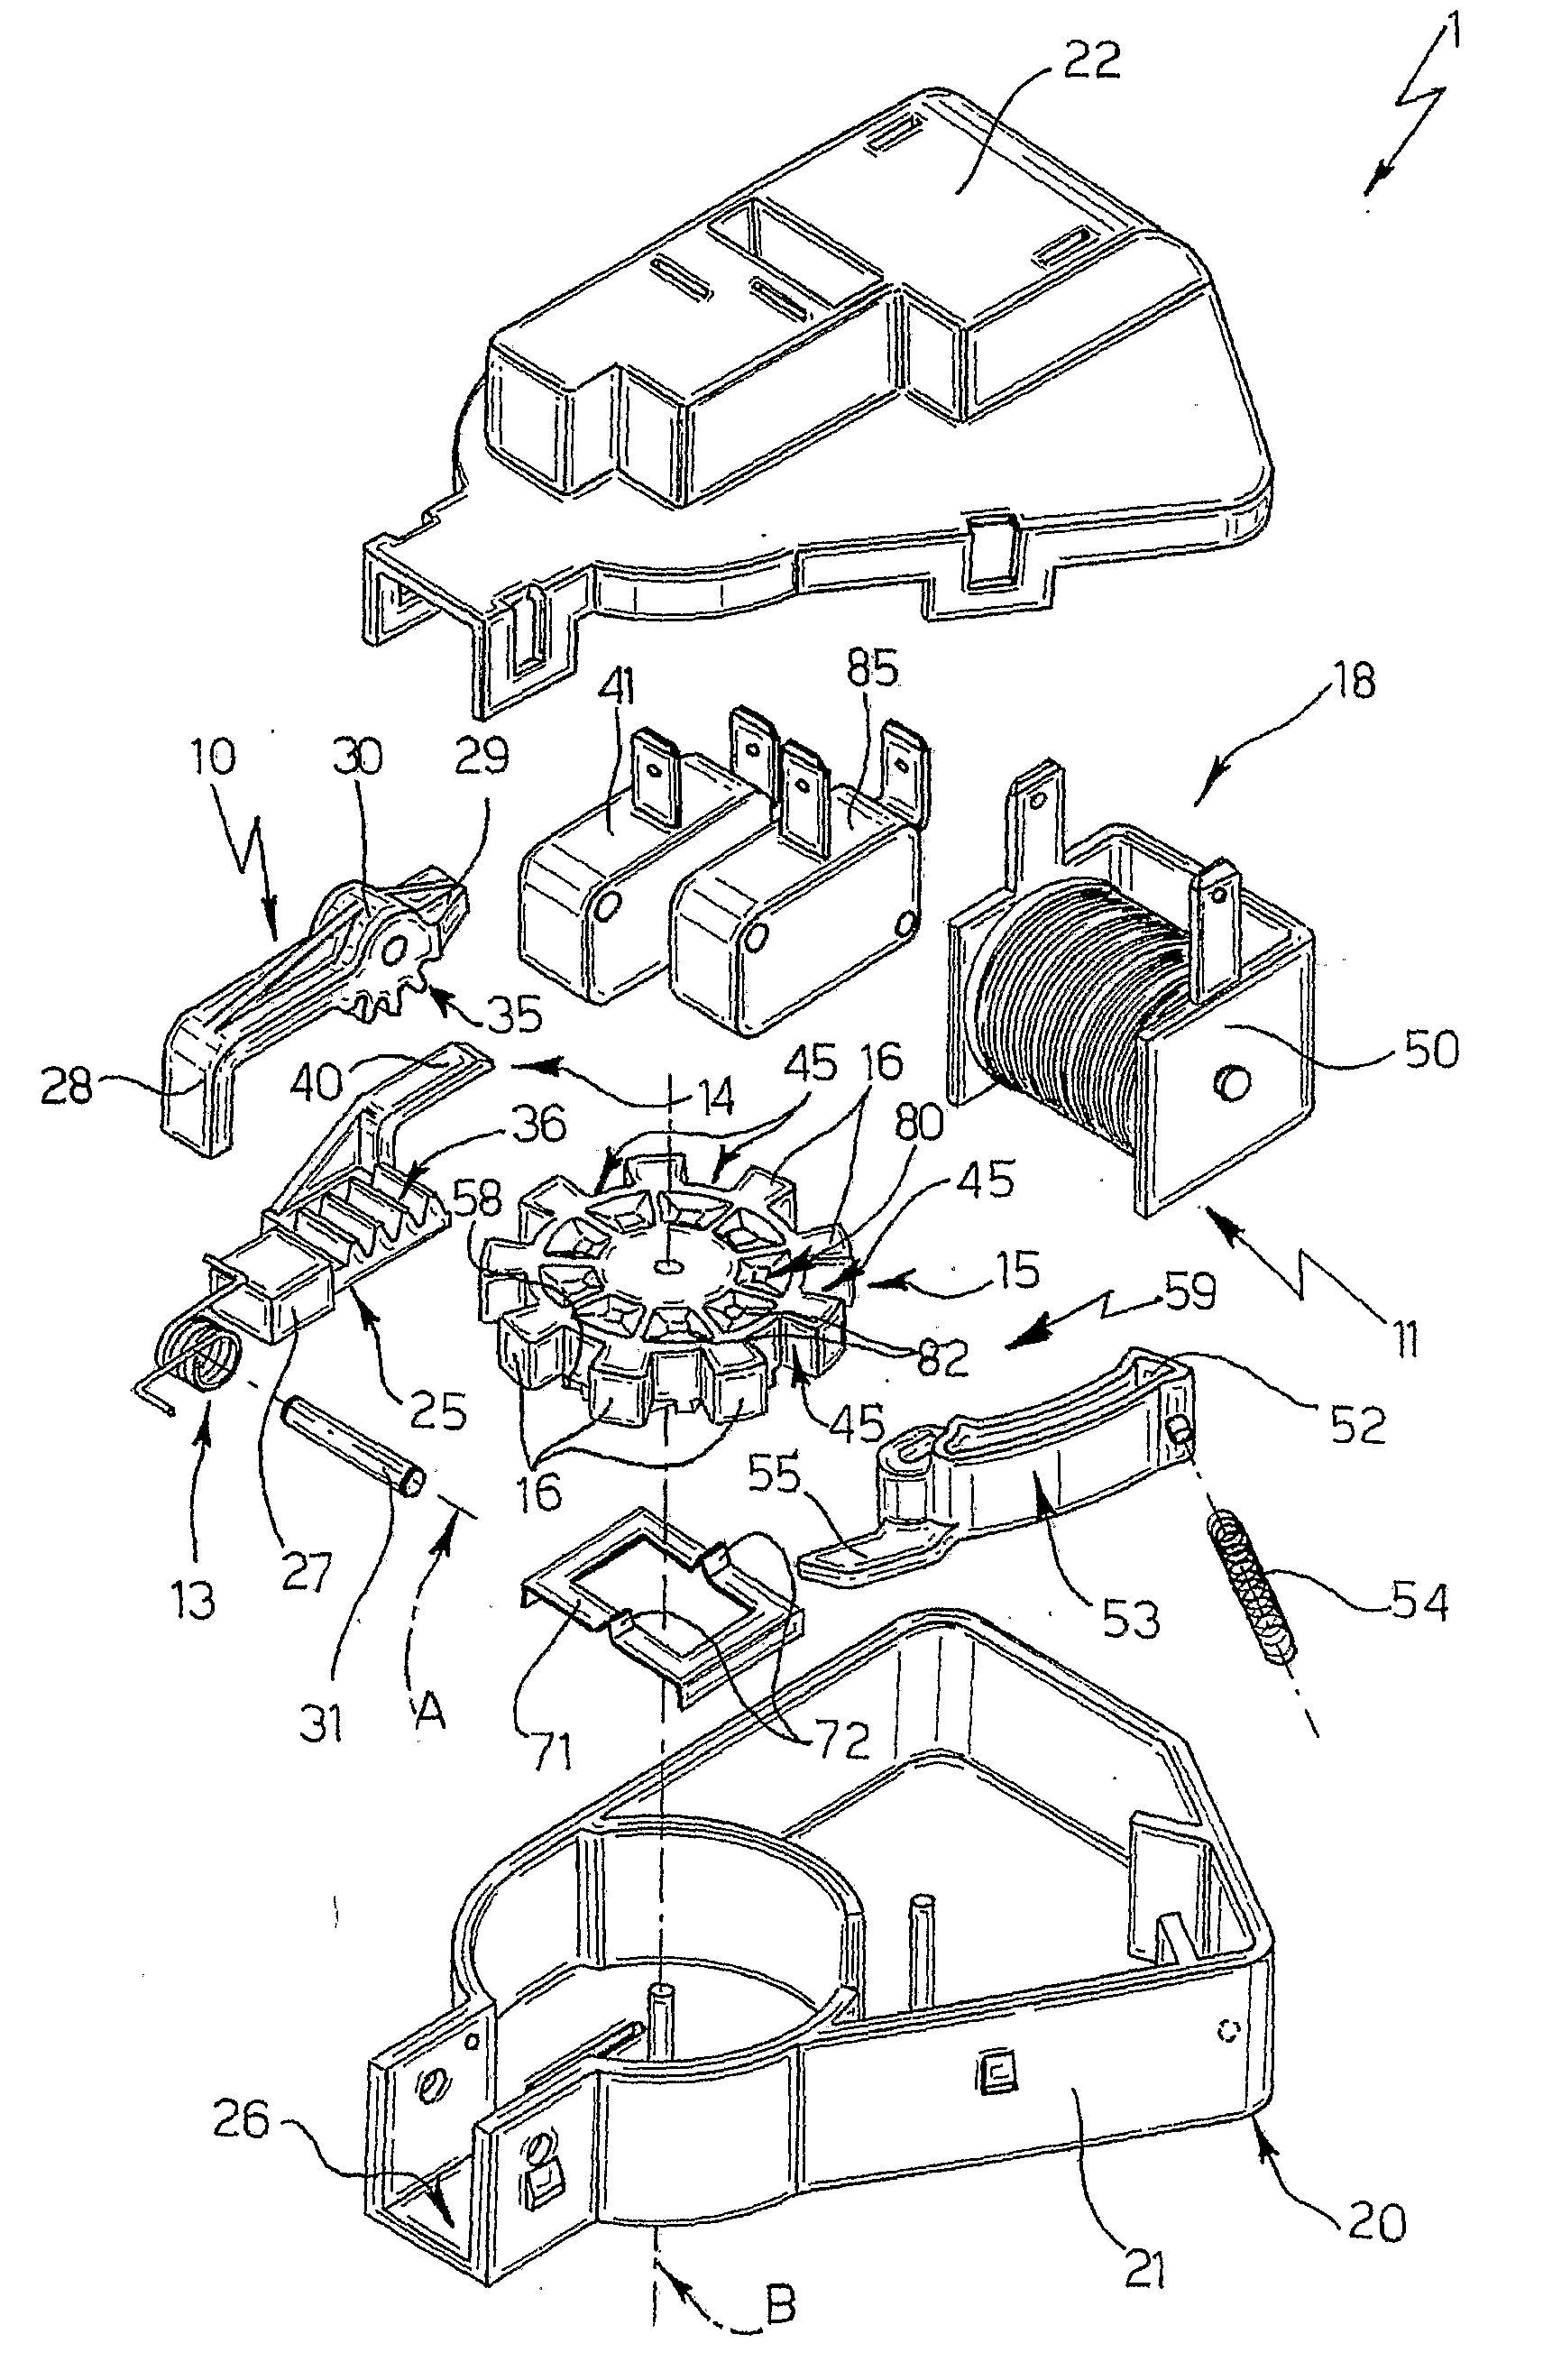 Blocking Device For the Door of a Pyrolitic Oven